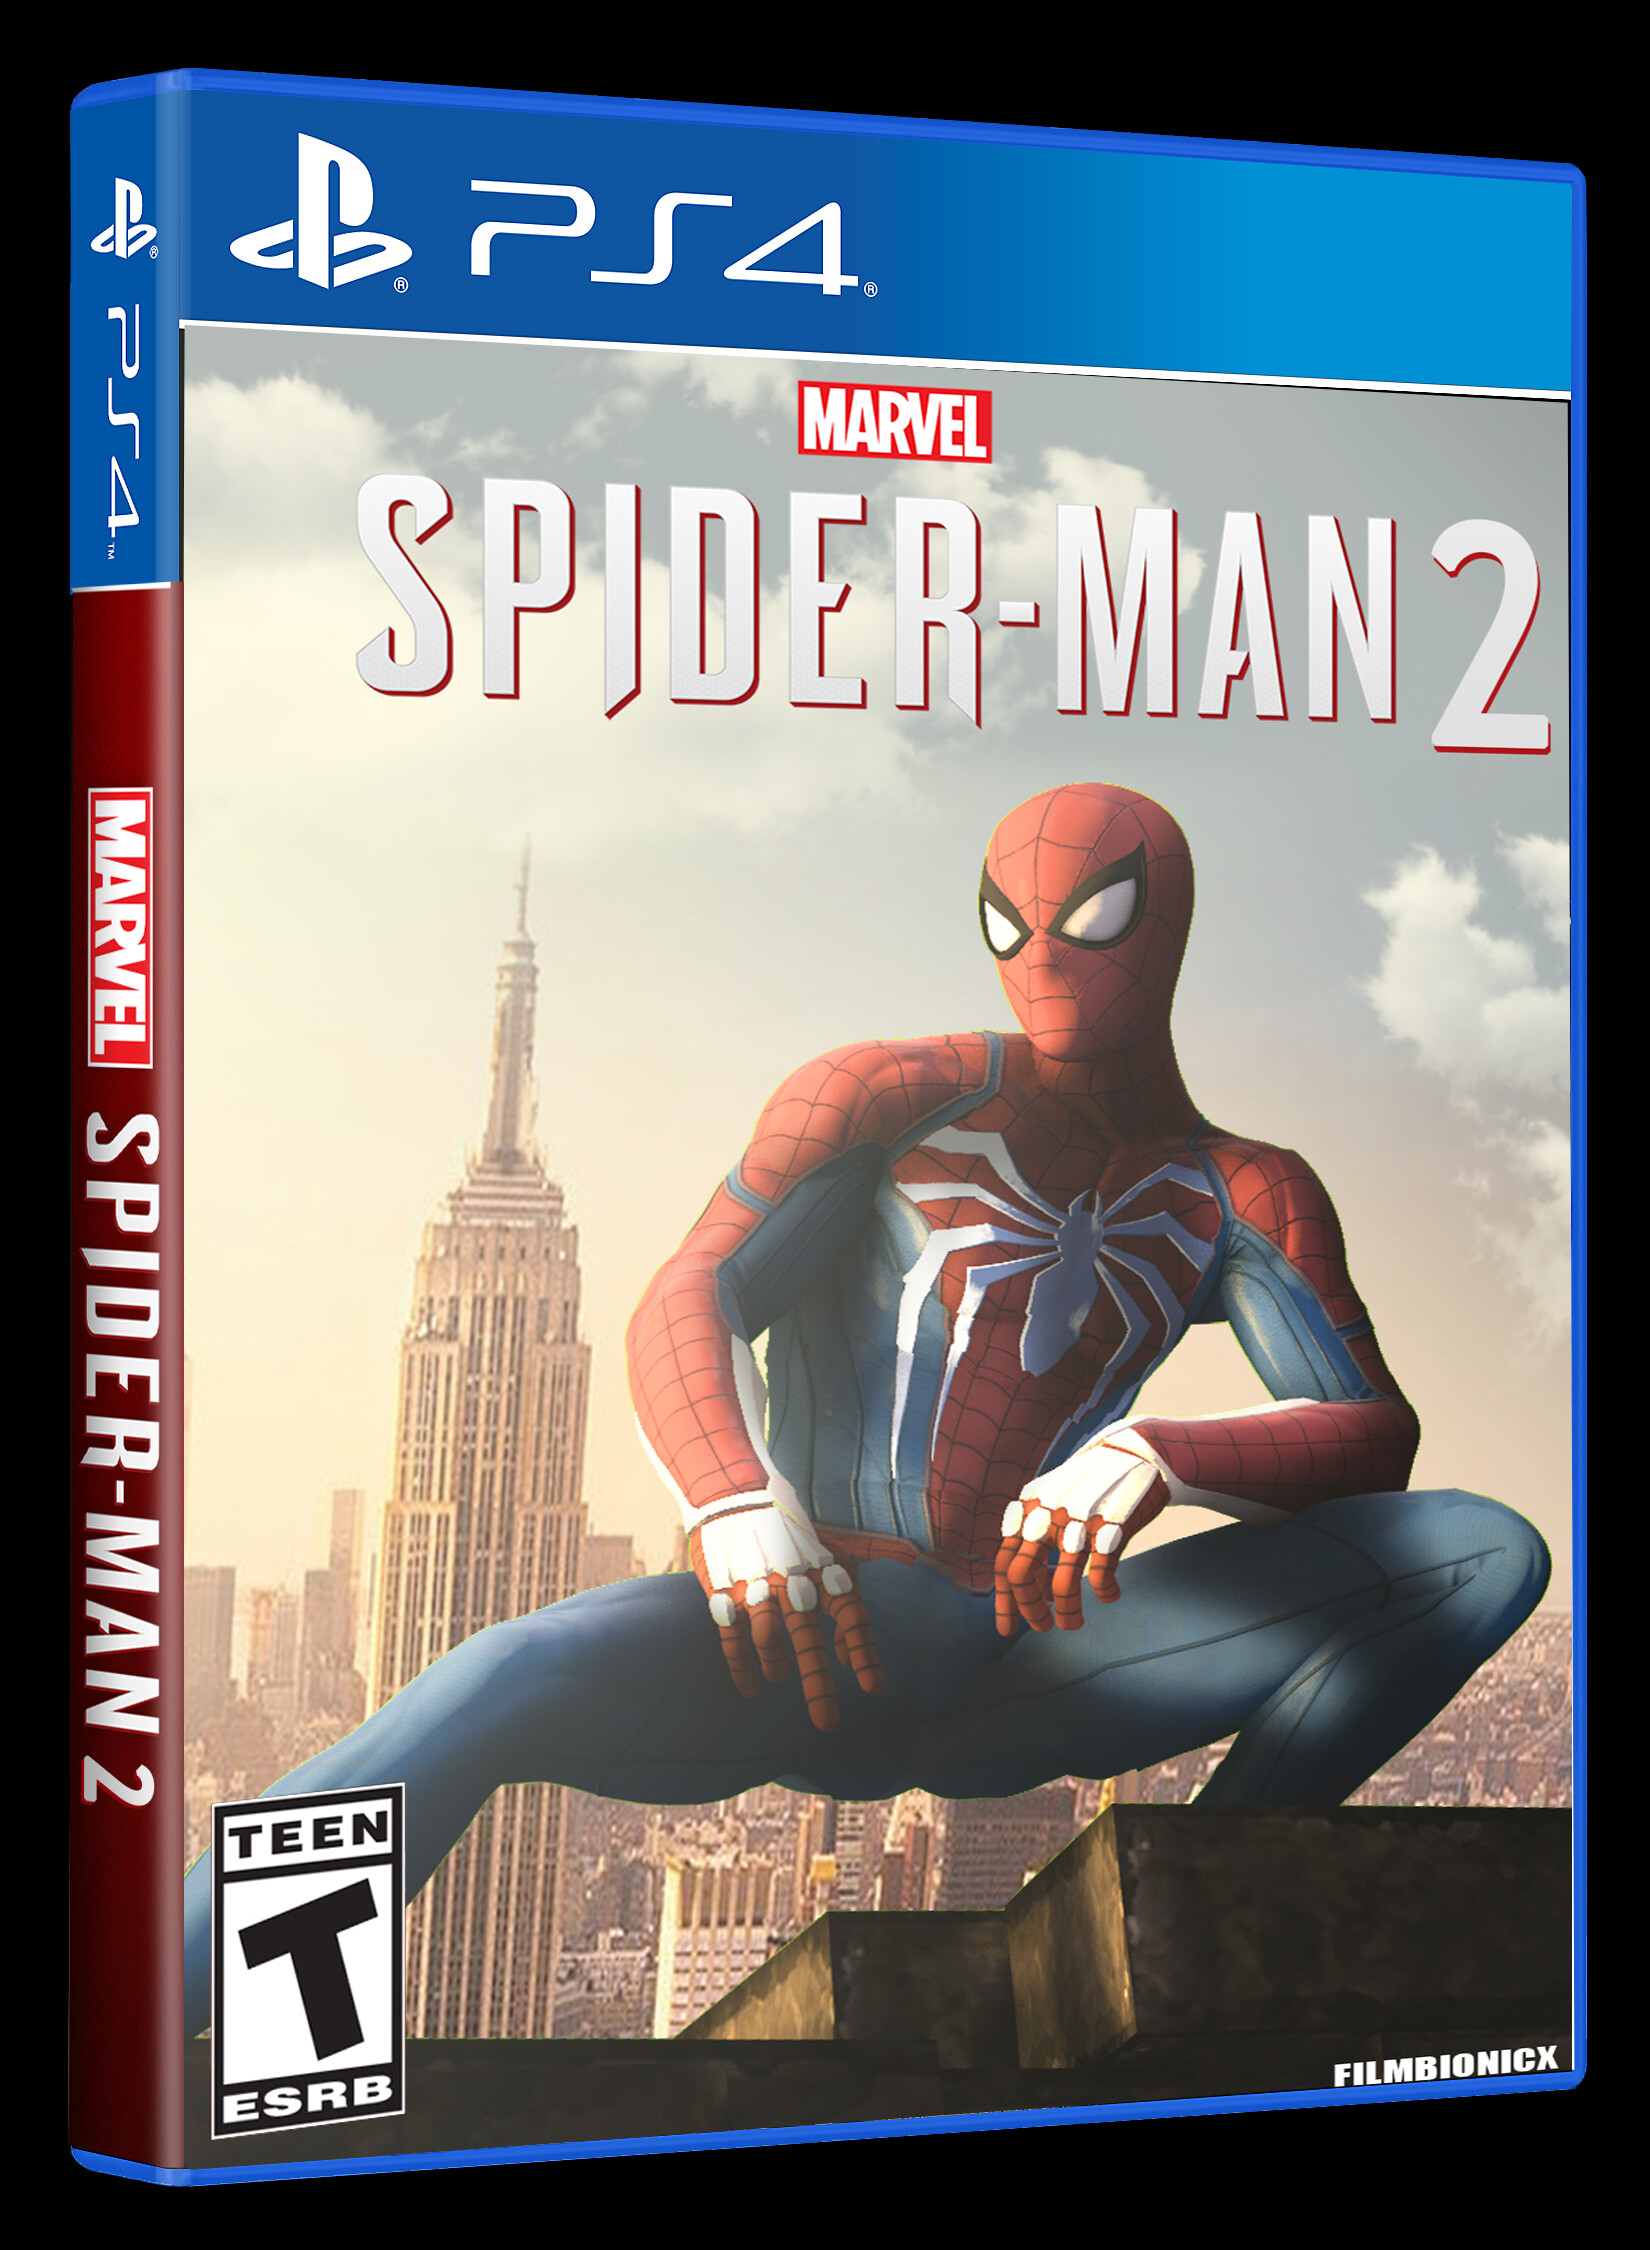 ArtStation SPIDERMAN 2 PS4 COVER BOX GAME